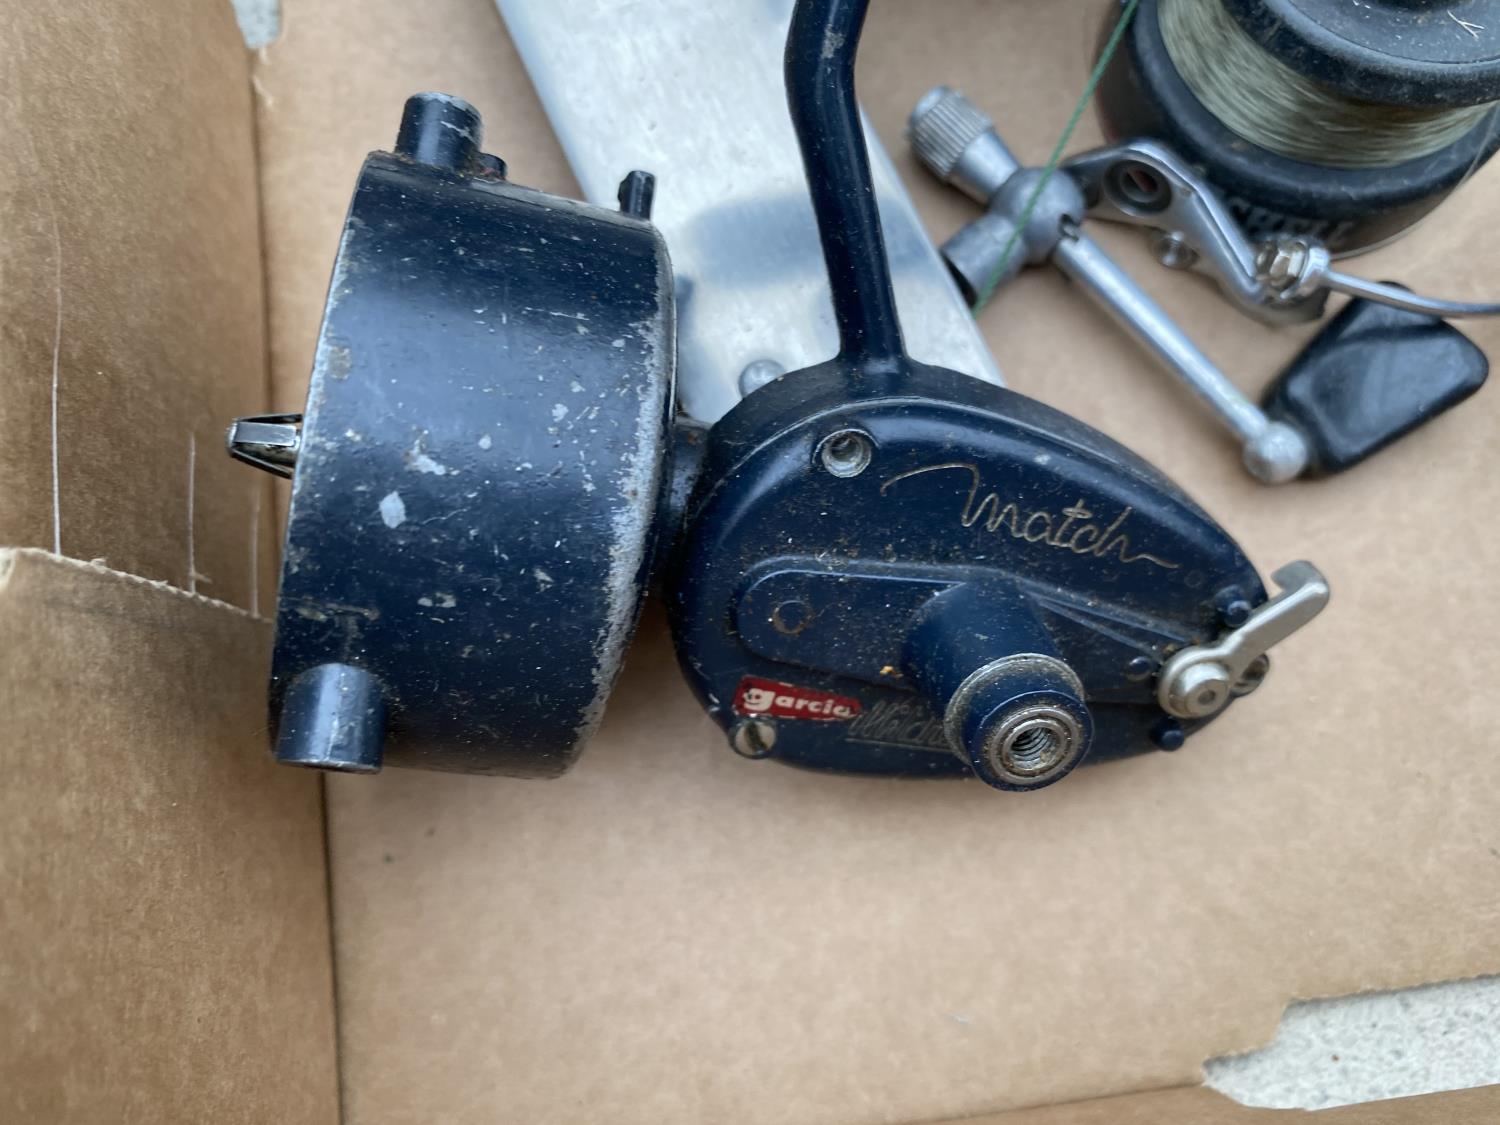 A MITCHELL 710 AUTOMATIC FLY REEL, A MITCHELL 300 REEL, 2 MITCHELL SPARE SPOOLS, A MITCHELL MATCH - Image 4 of 5